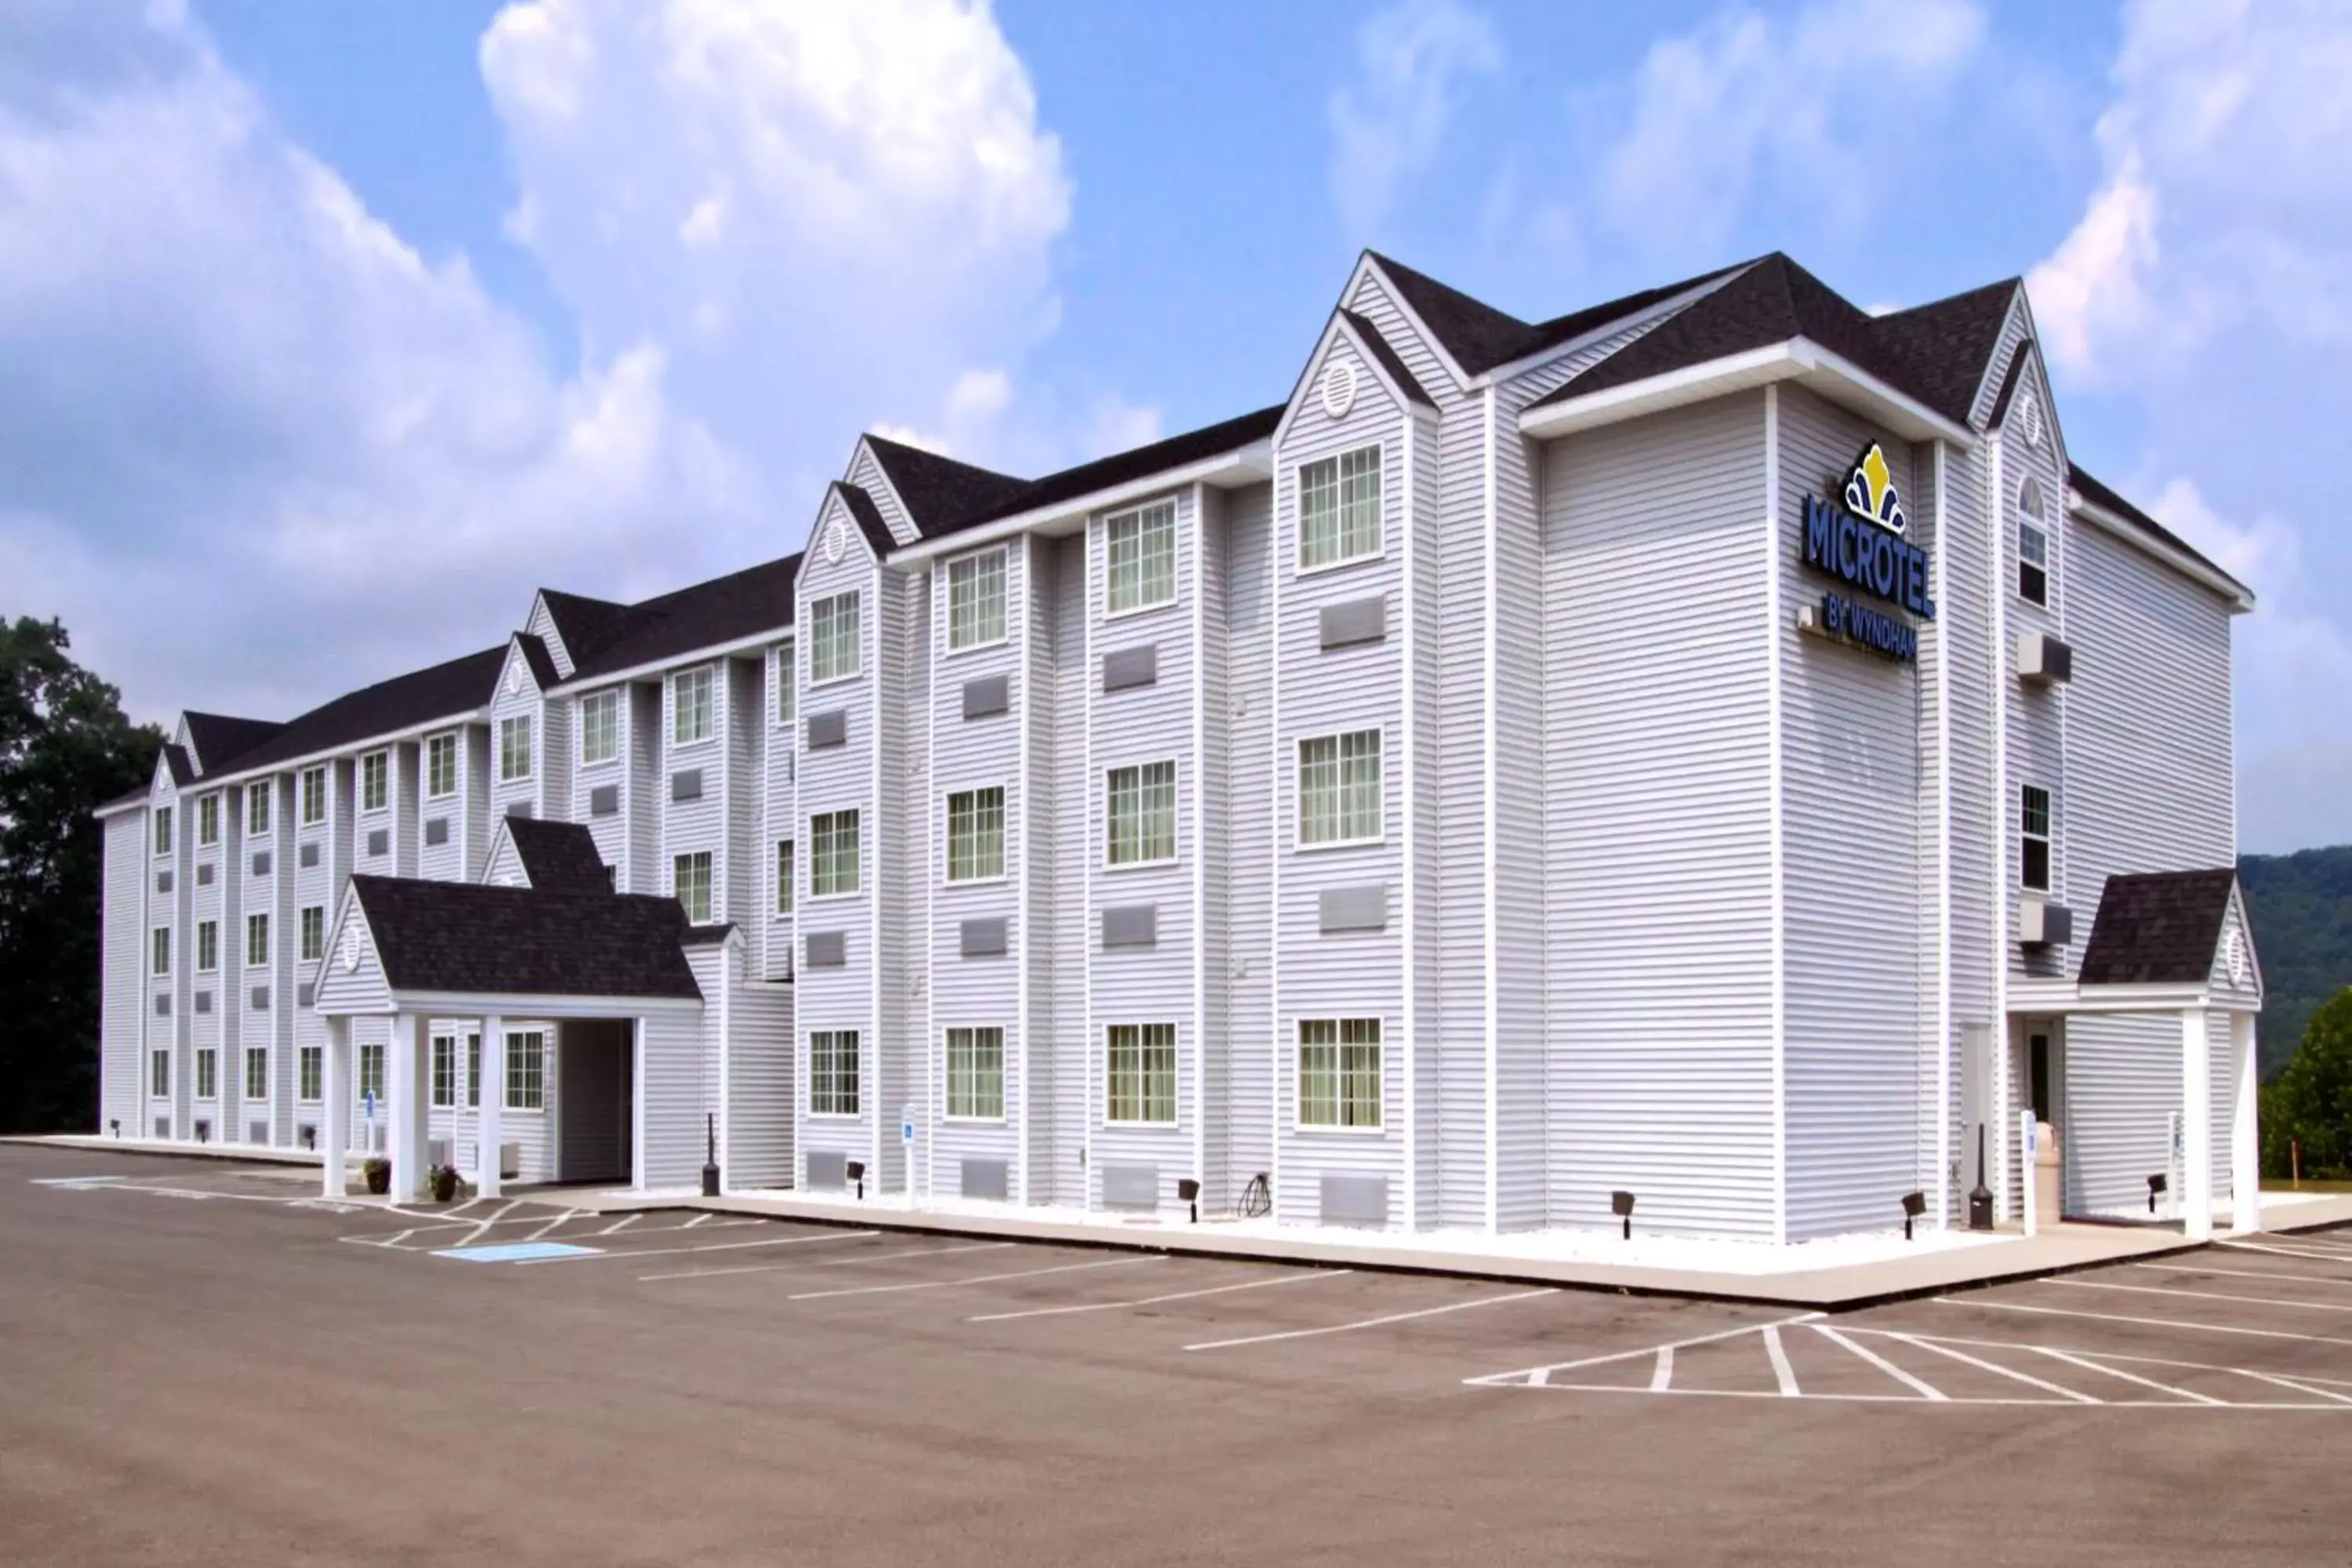 Facade/entrance, Property Building in Microtel Inn and Suites Gassaway